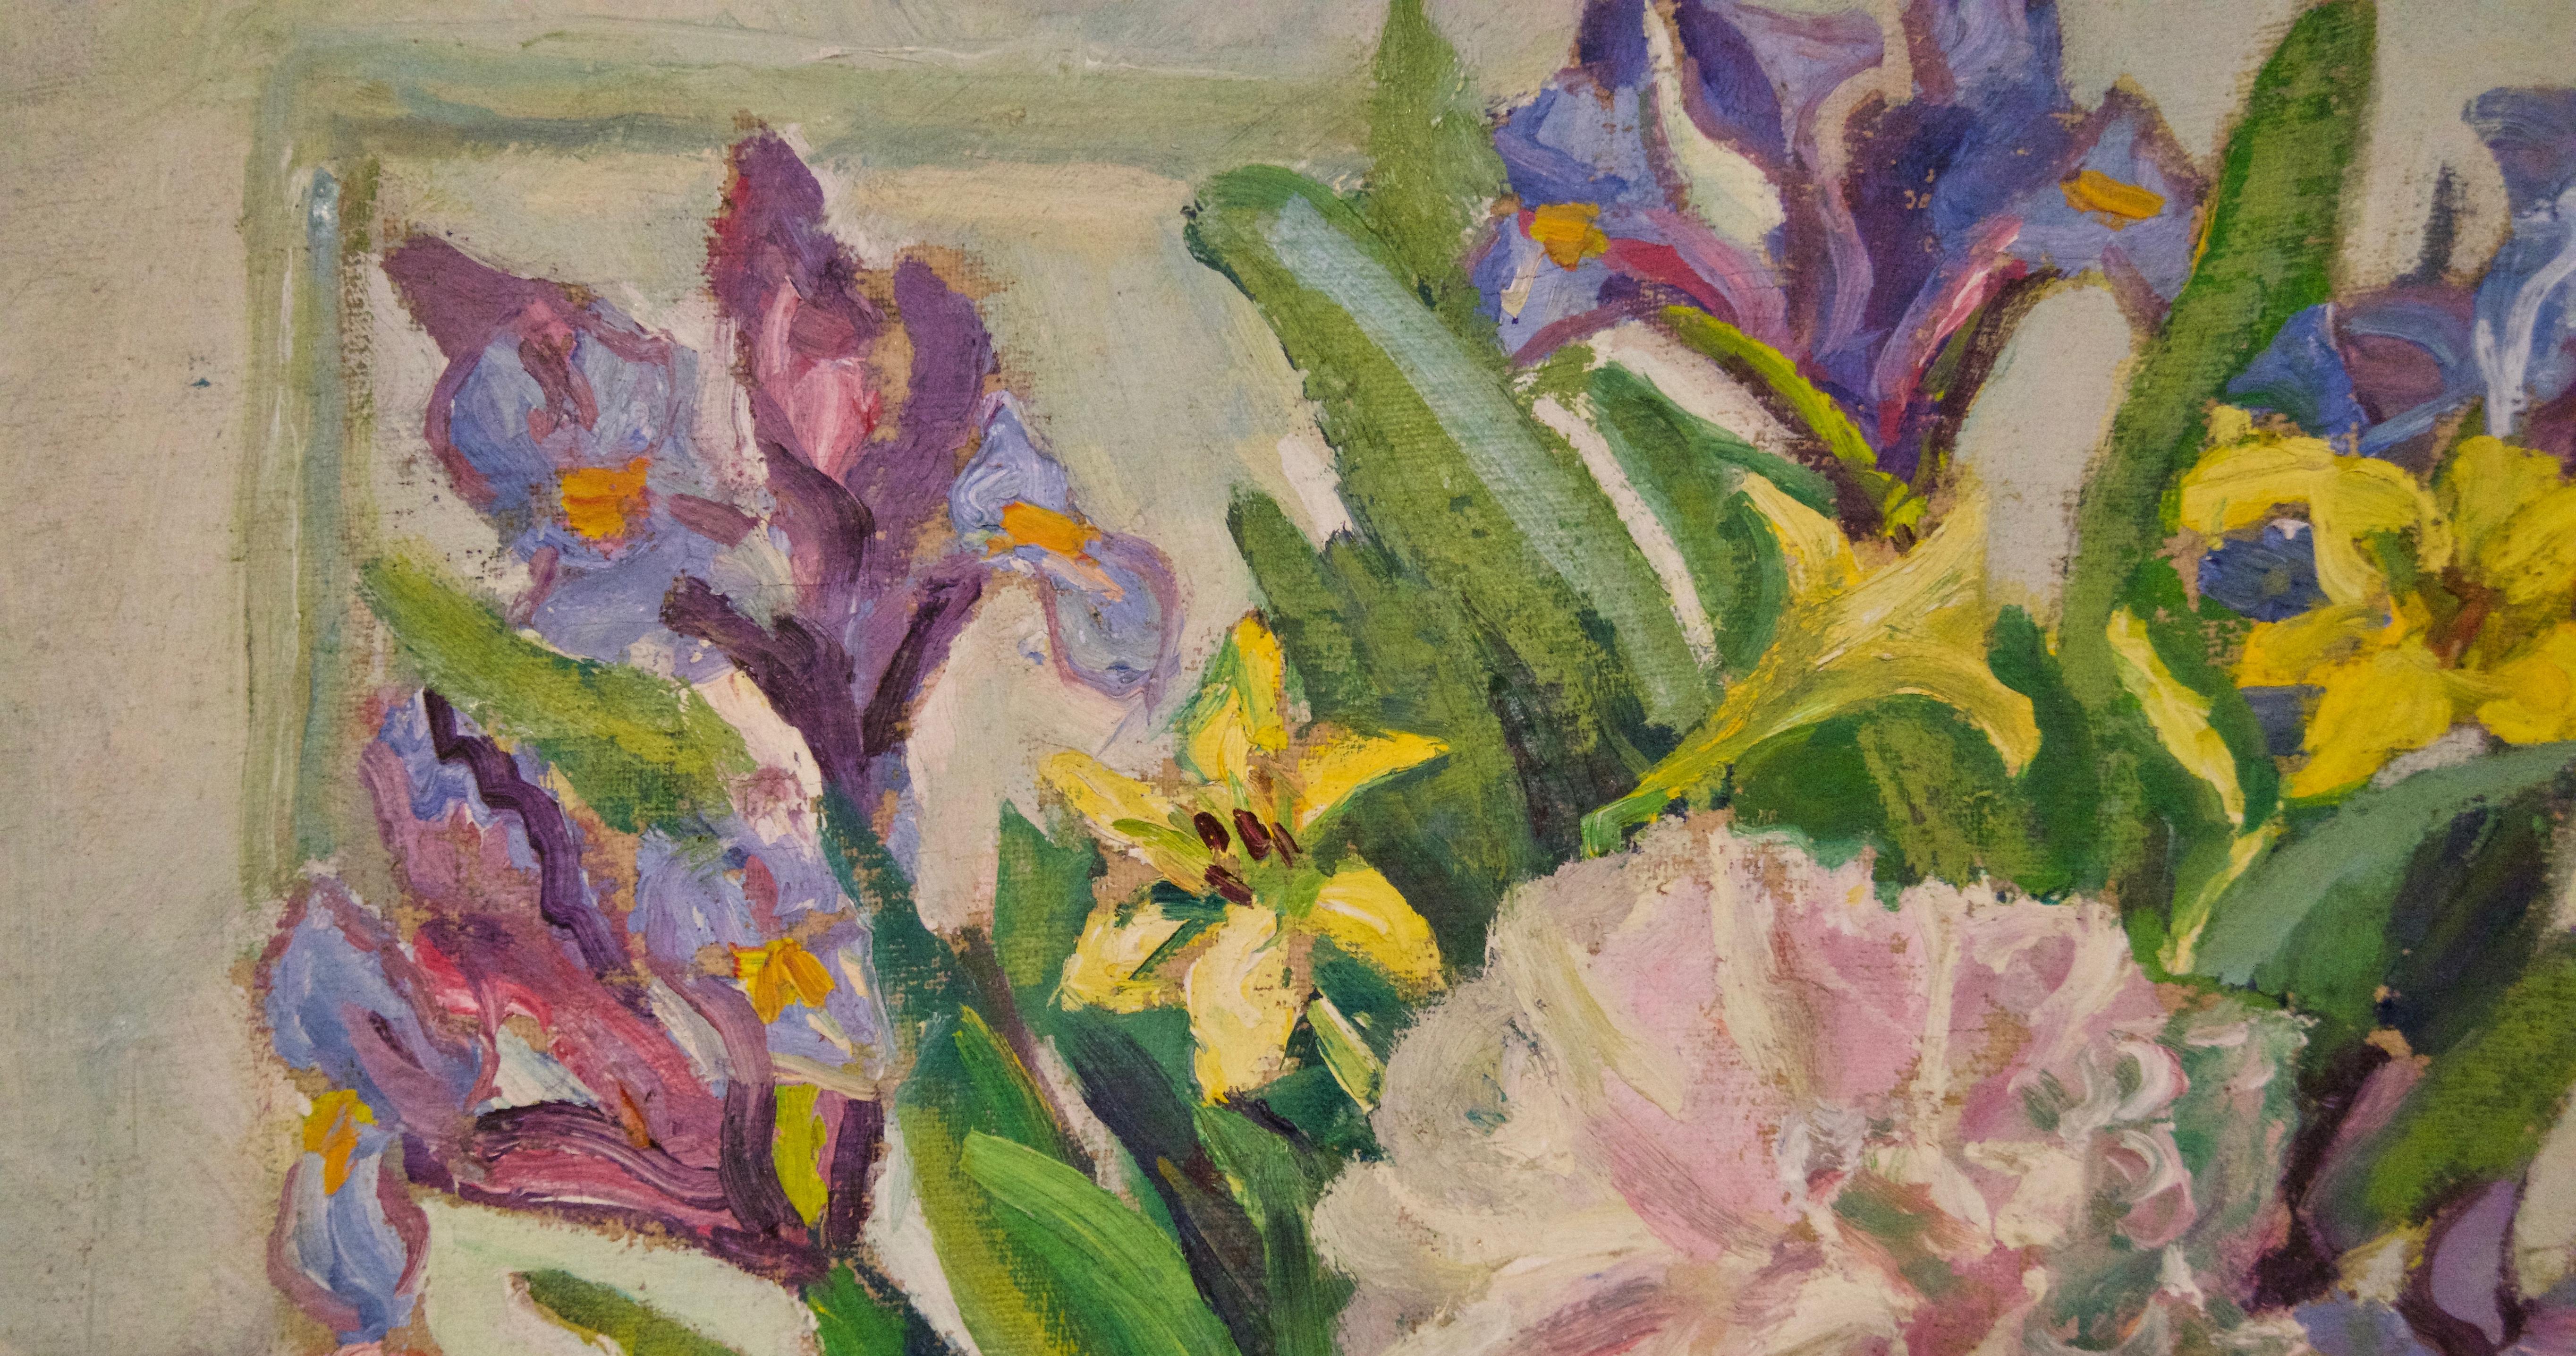 Still Life Flowers - Early 20th Century Oil on Canvas by E C Fisher Clay - Post-Impressionist Painting by Elizabeth Campbell Fisher Clay